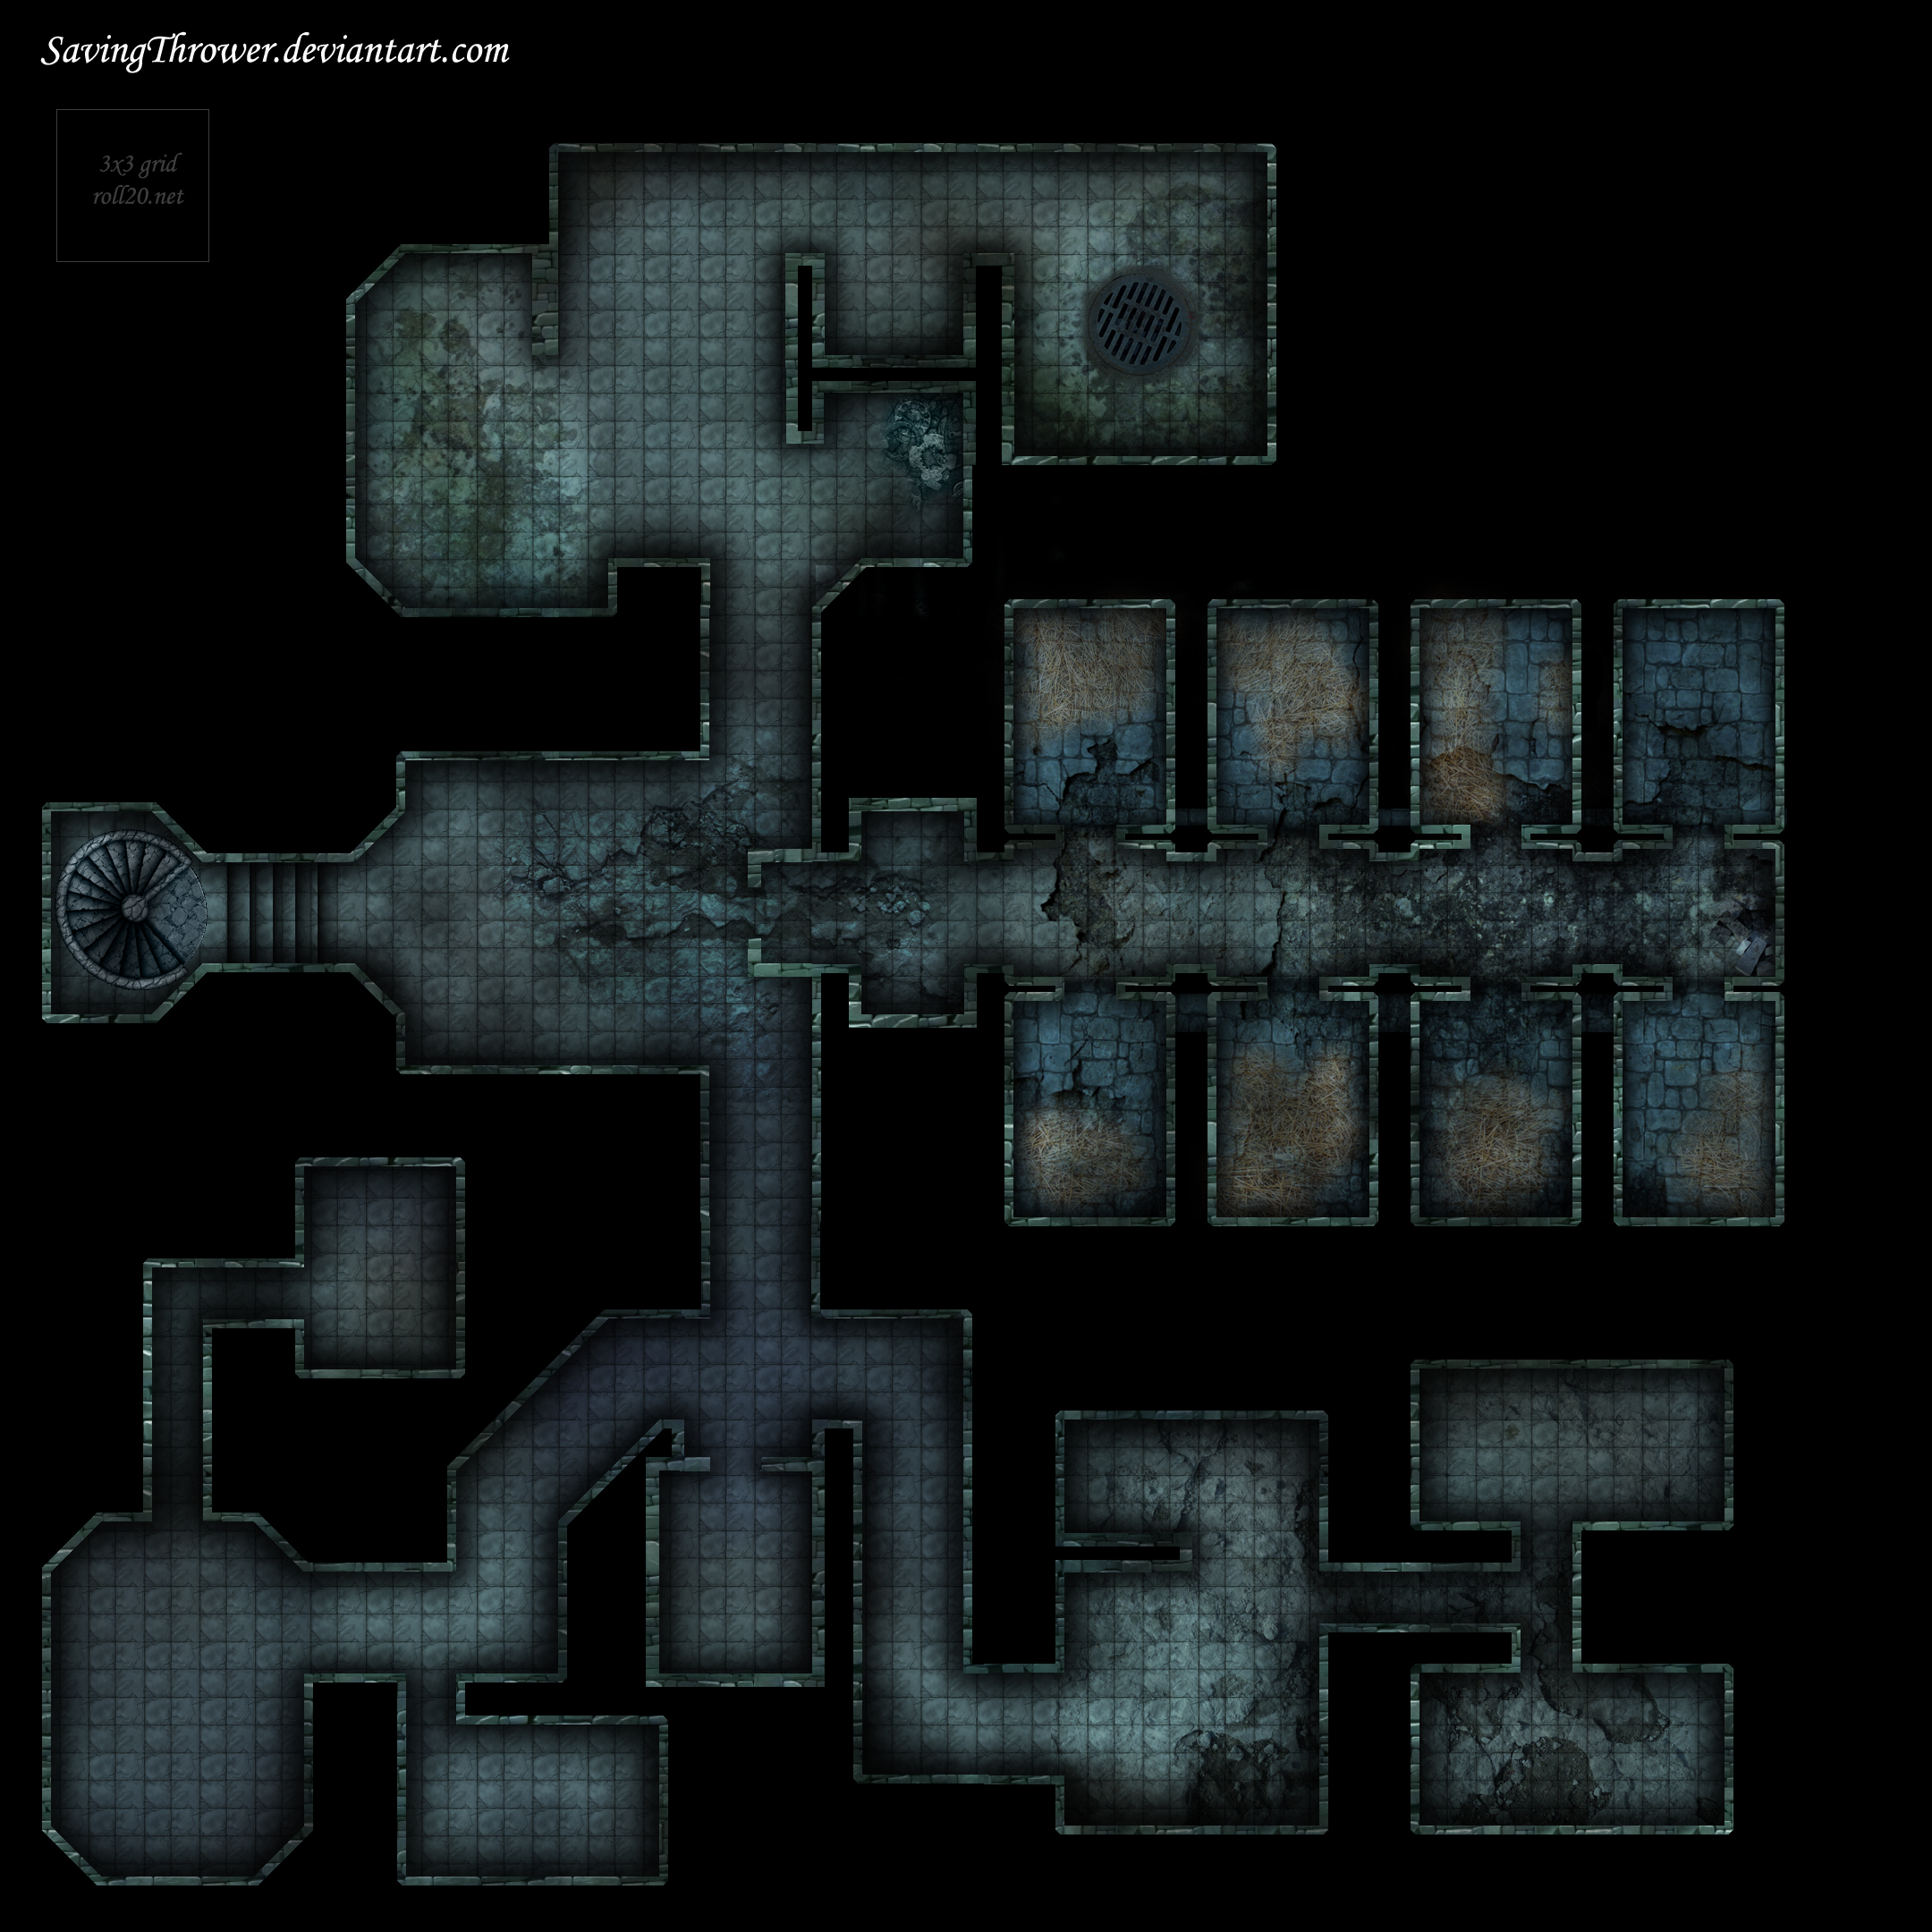 Clean abandoned prison dungeon battlemap roll20 by SavingThrower on